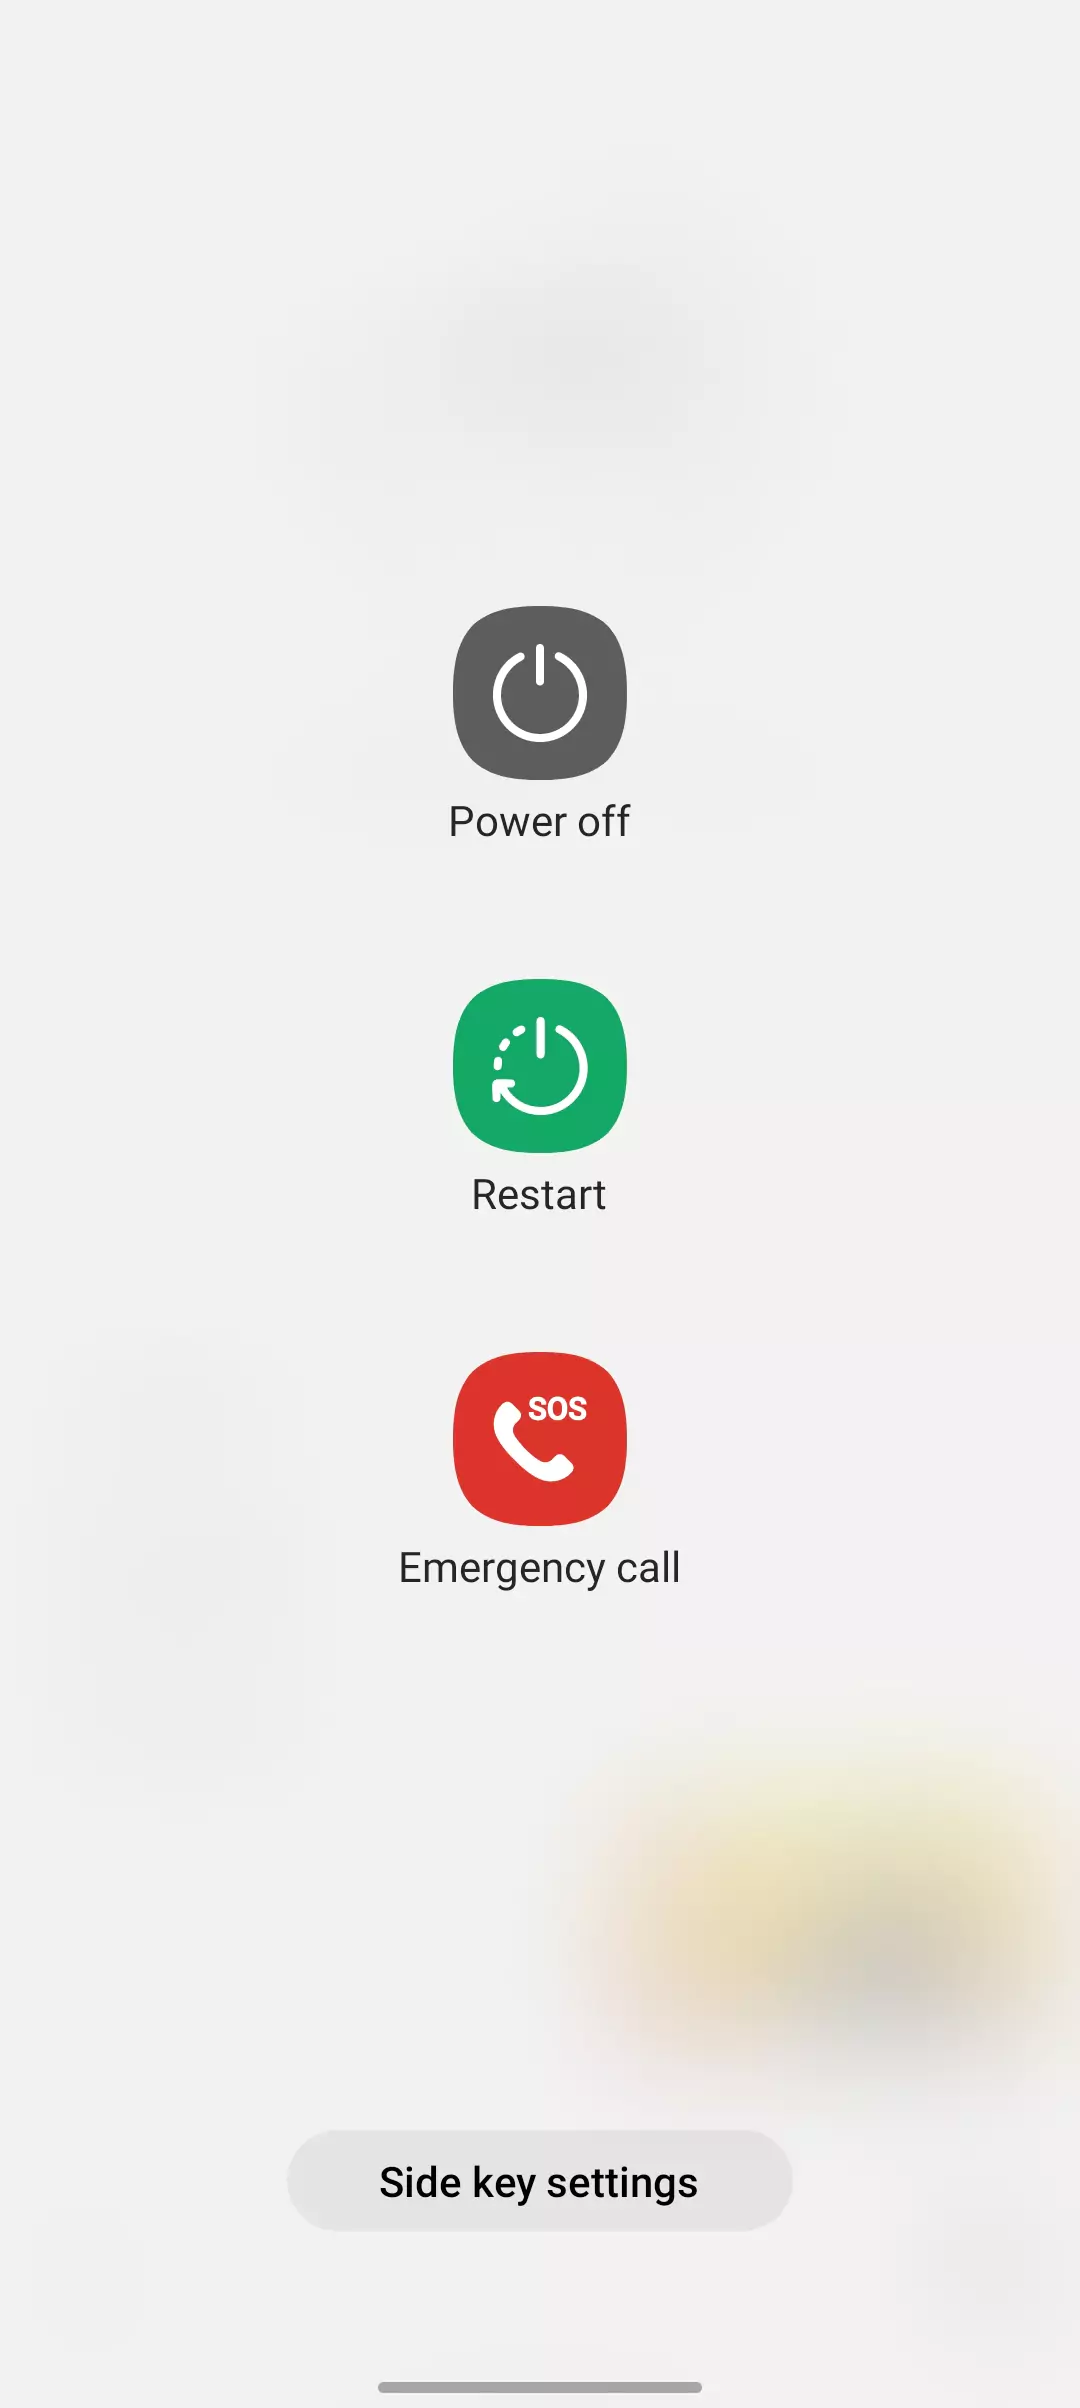 screenshot of restarting the device with power off and emergency call